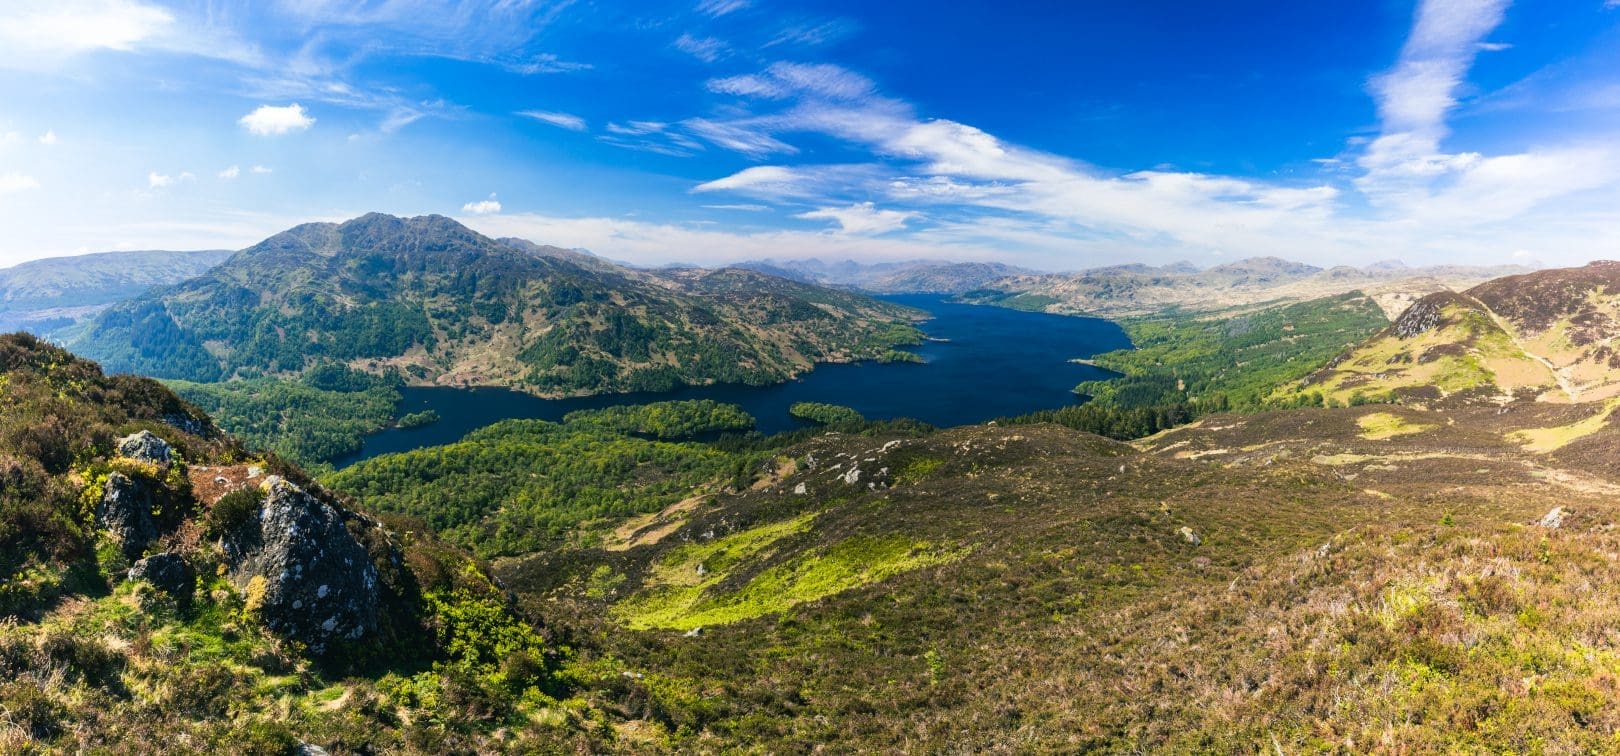 Ben A'an hill and the Loch Katrine in the Trossachs, Scotland Visit Scotland this Spring